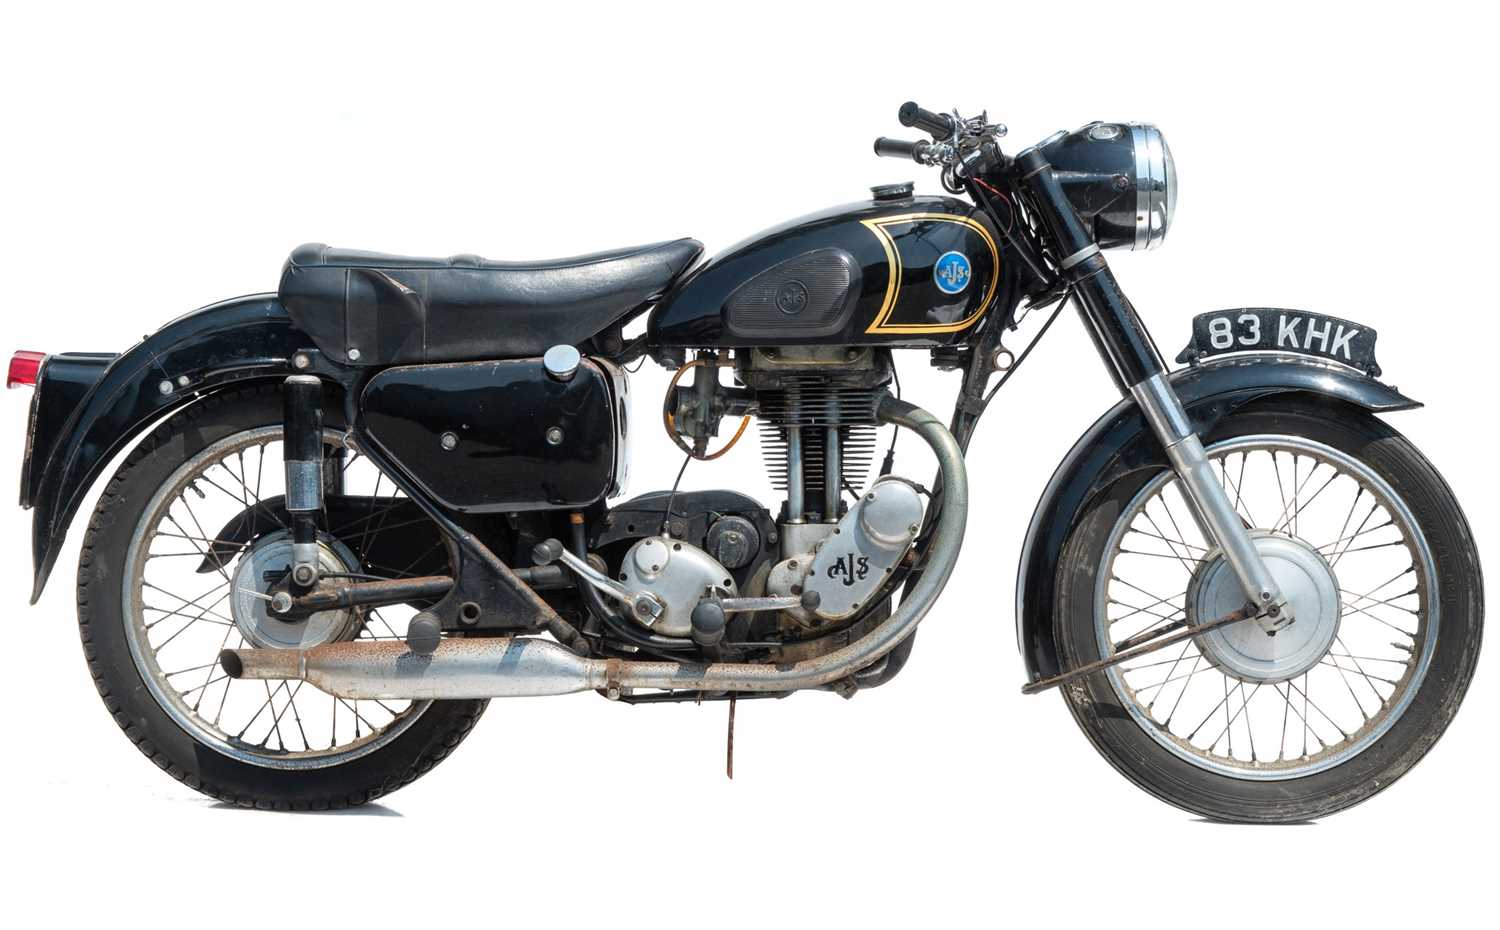 PRIVATE COLLECTION OF MOTORCYCLES UP FOR AUCTION TOMORROW